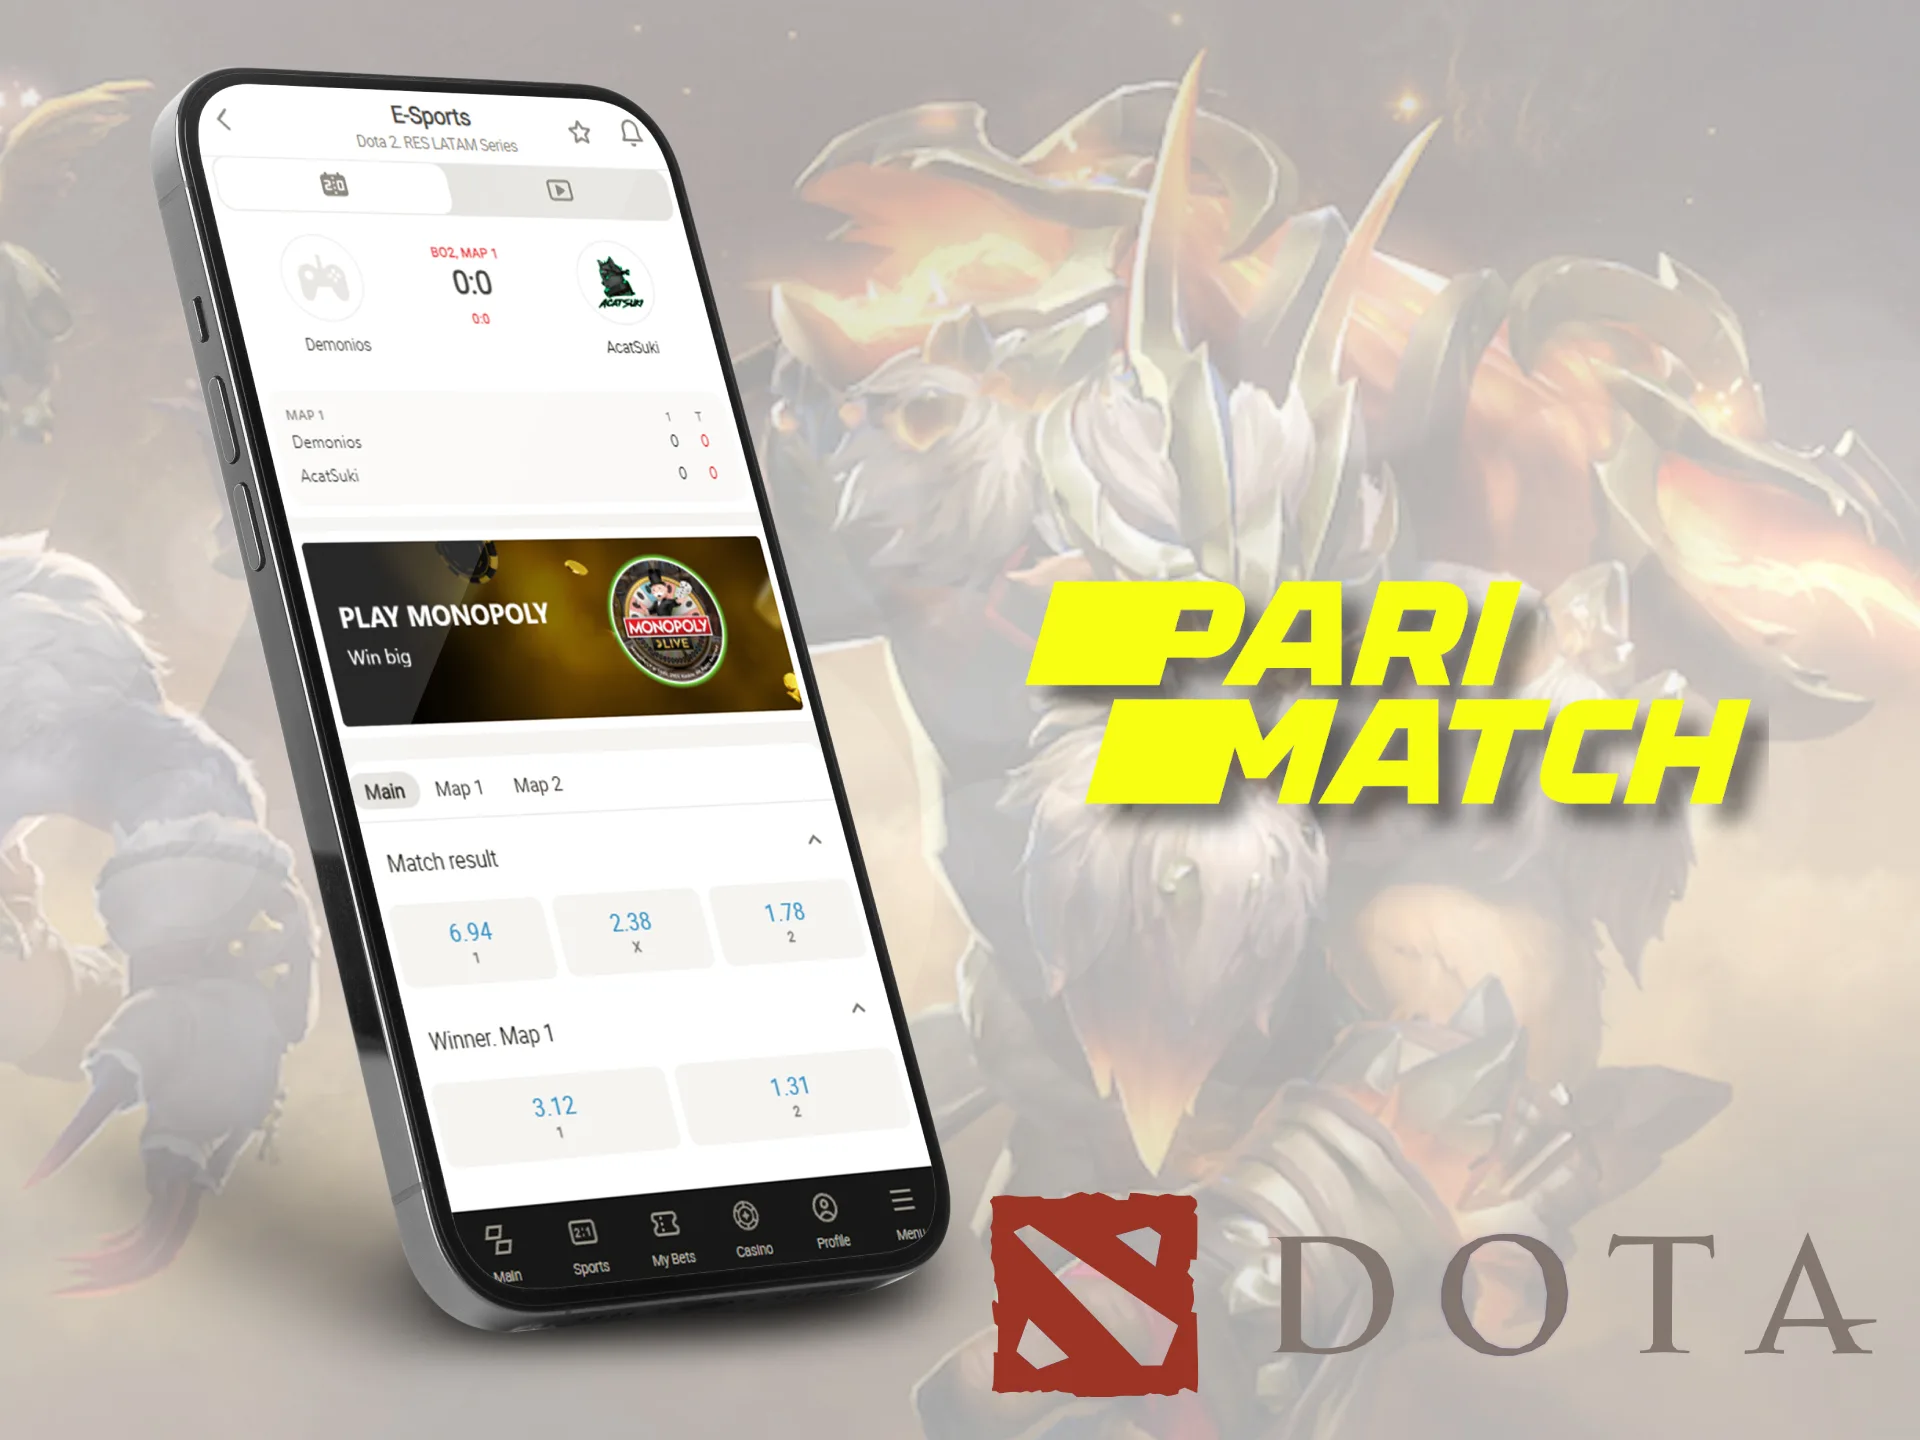 Bet on Dota 2 from Parimatch mobile app.